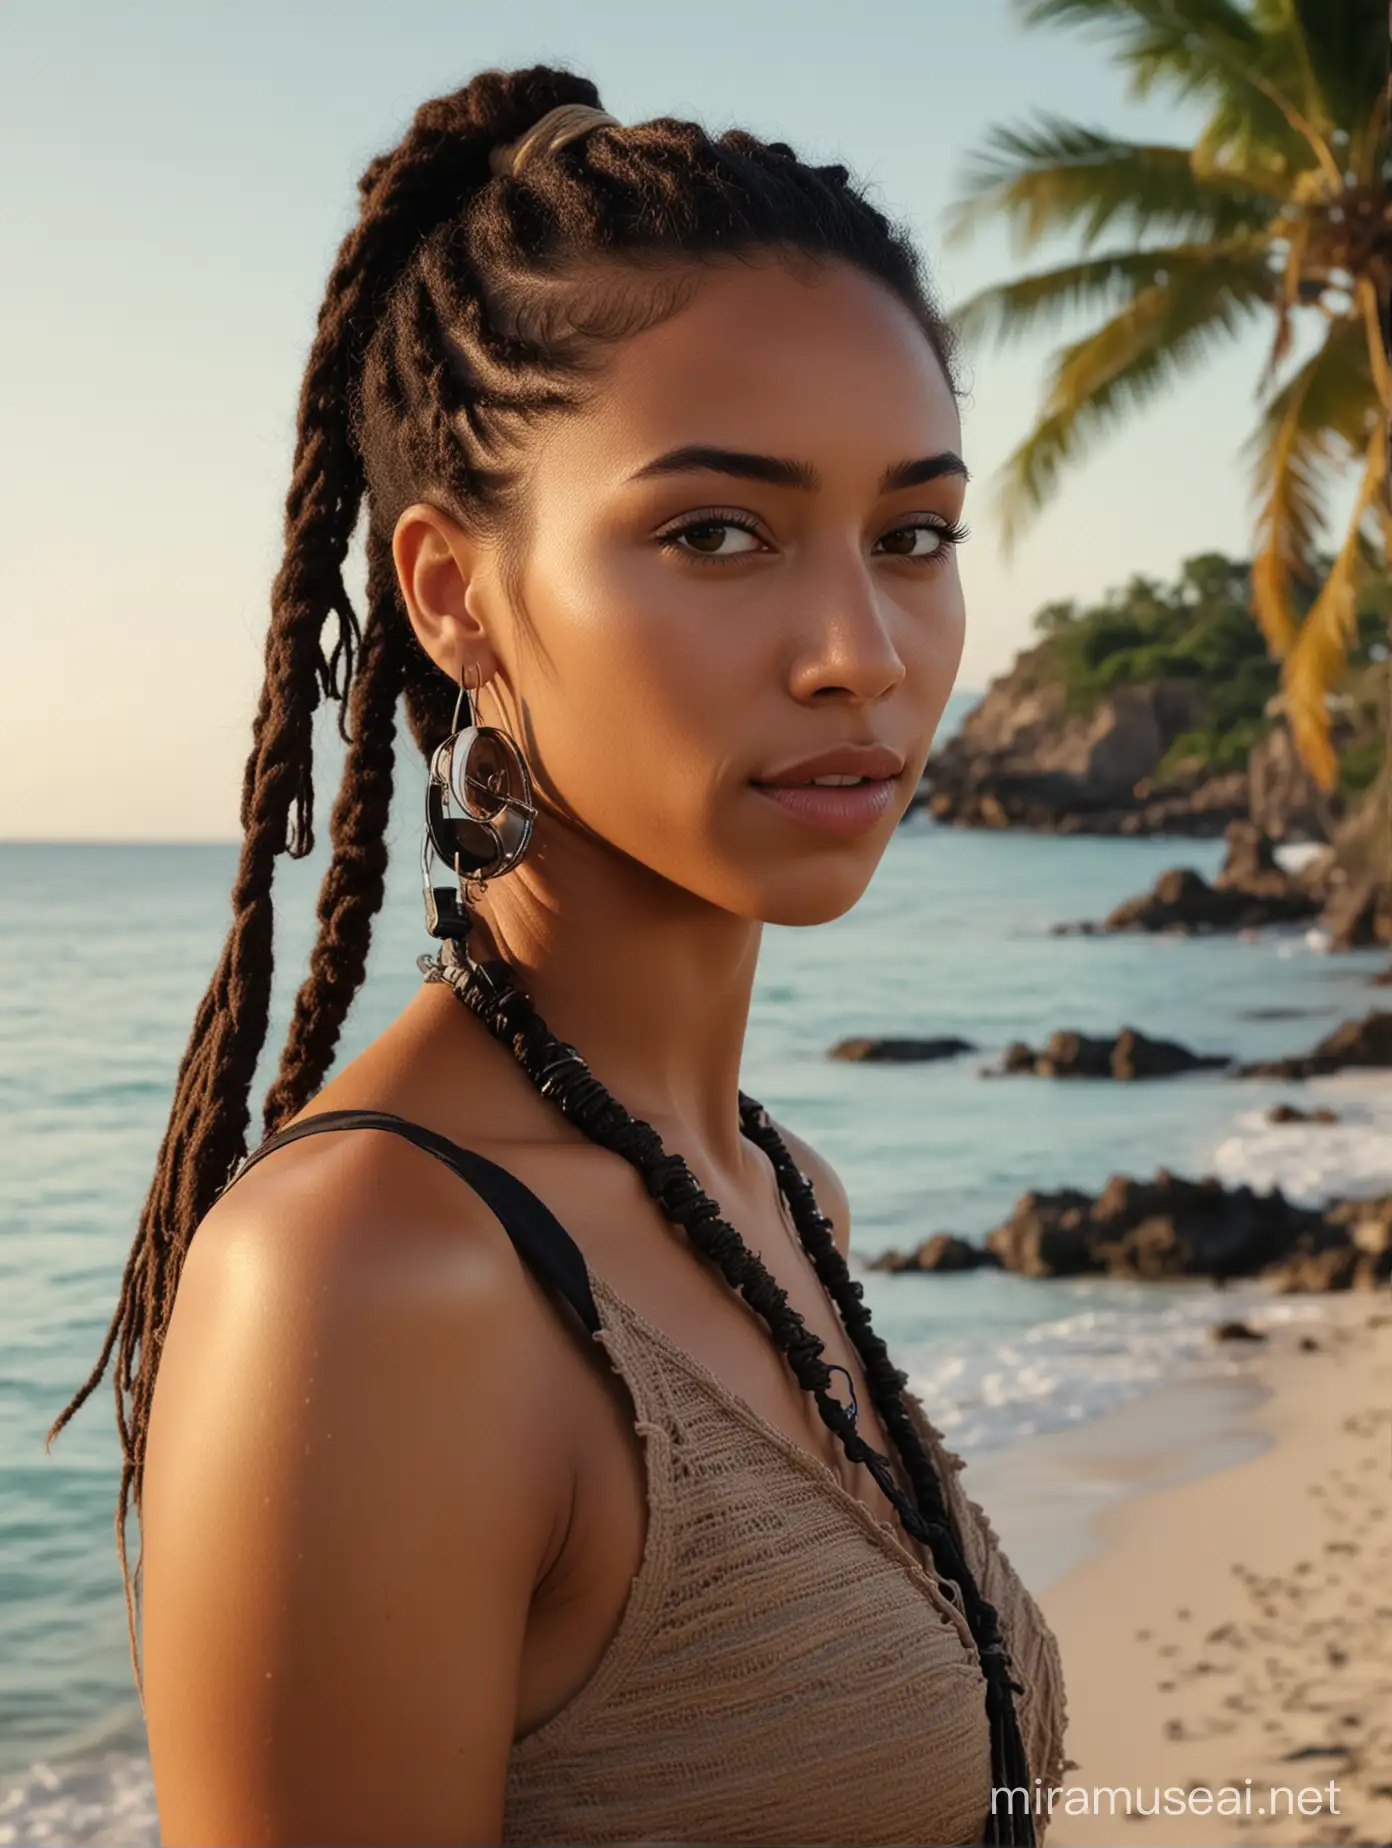 Stylish Caribbean Woman with Ponytail Dreadlocks by the Shore